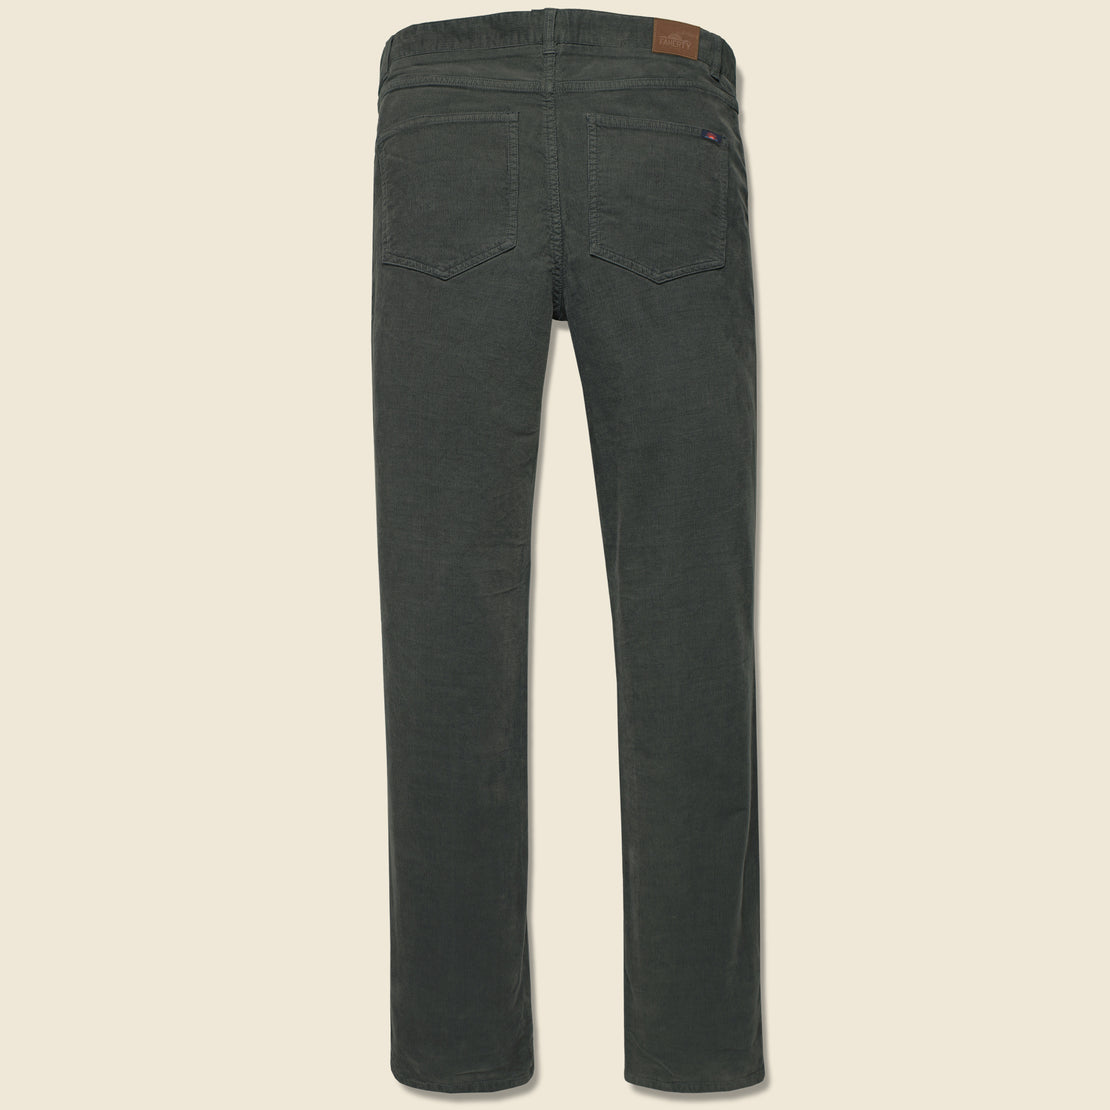 Stretch Corduroy Pant - Washed Black - Faherty - STAG Provisions - Pants - Corduroy